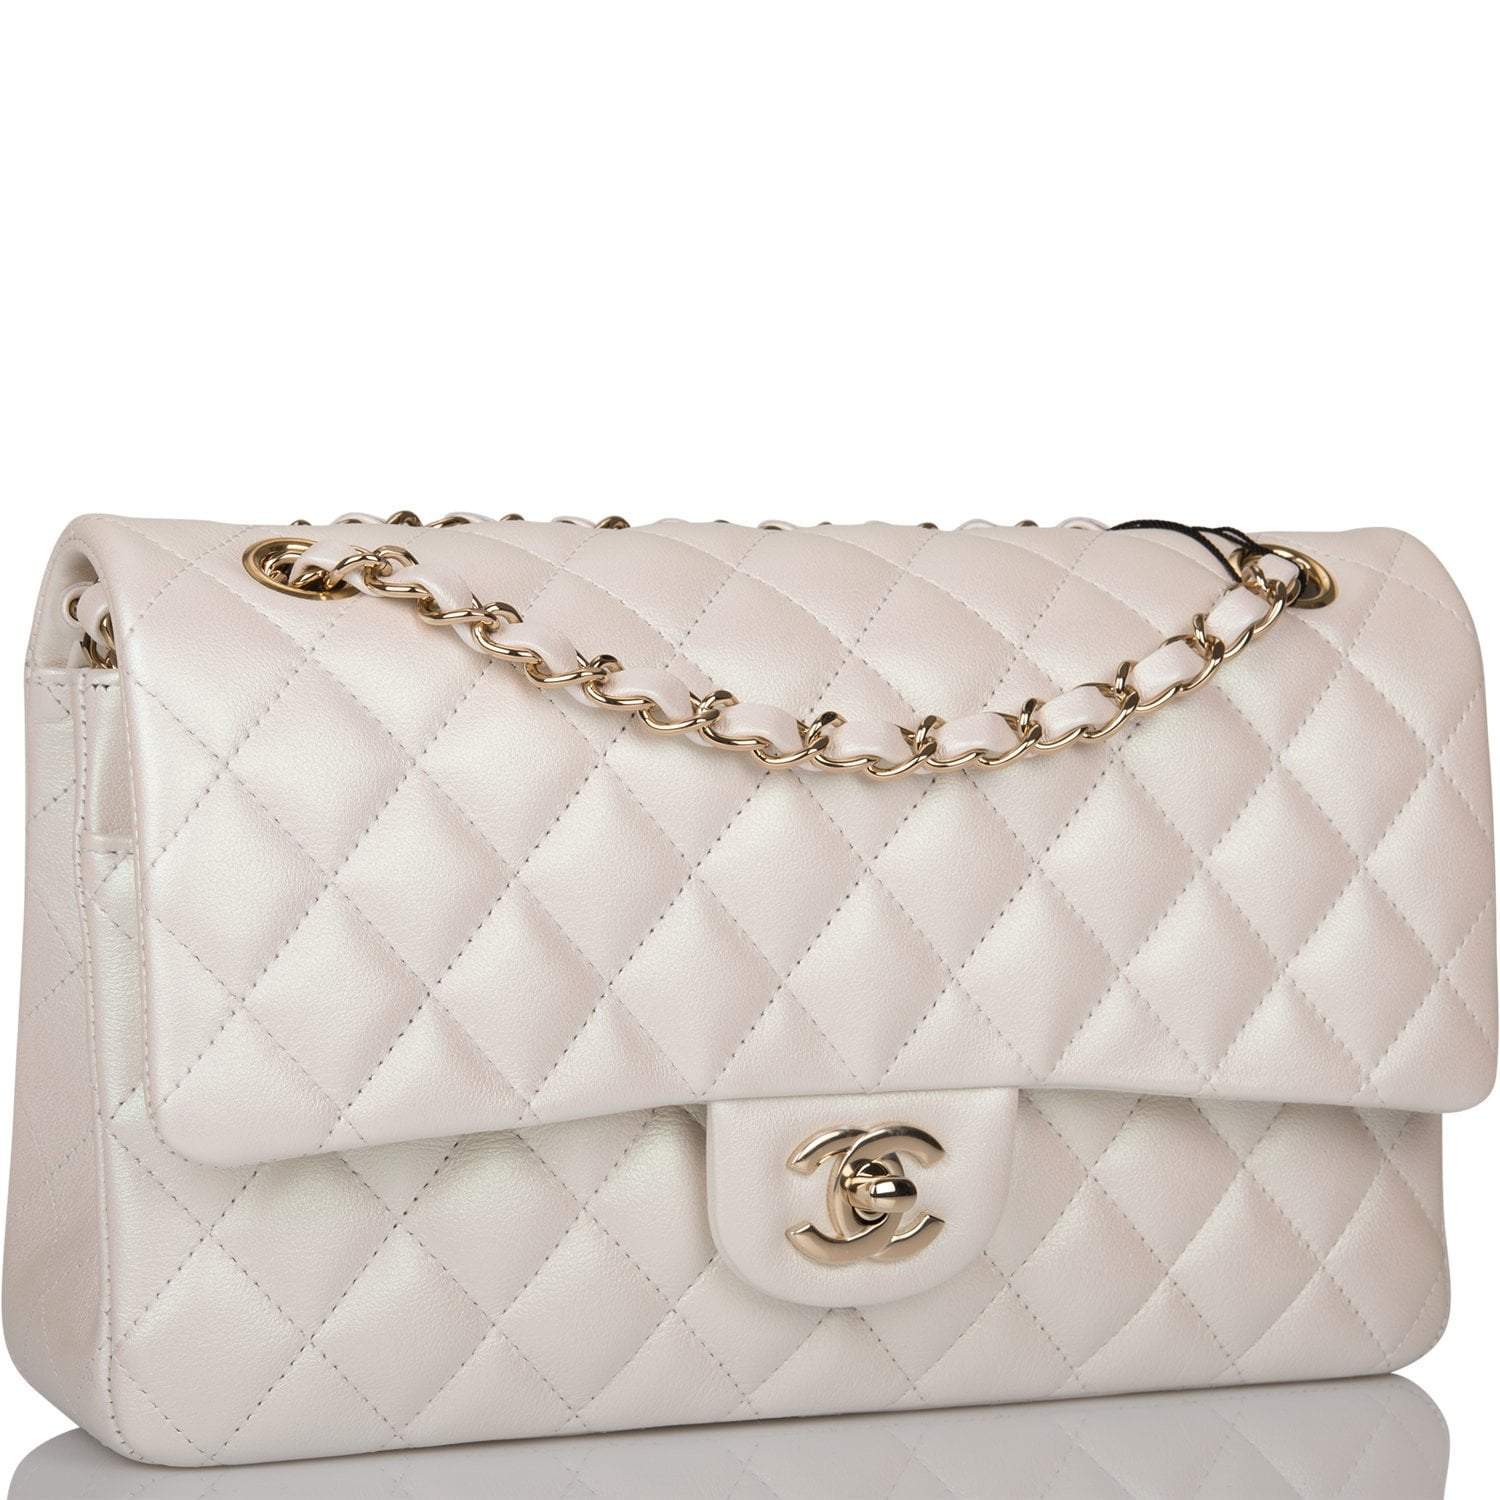 Chanel White Iridescent Quilted Lambskin Medium Classic Double Flap Bag Light Gold Hardware